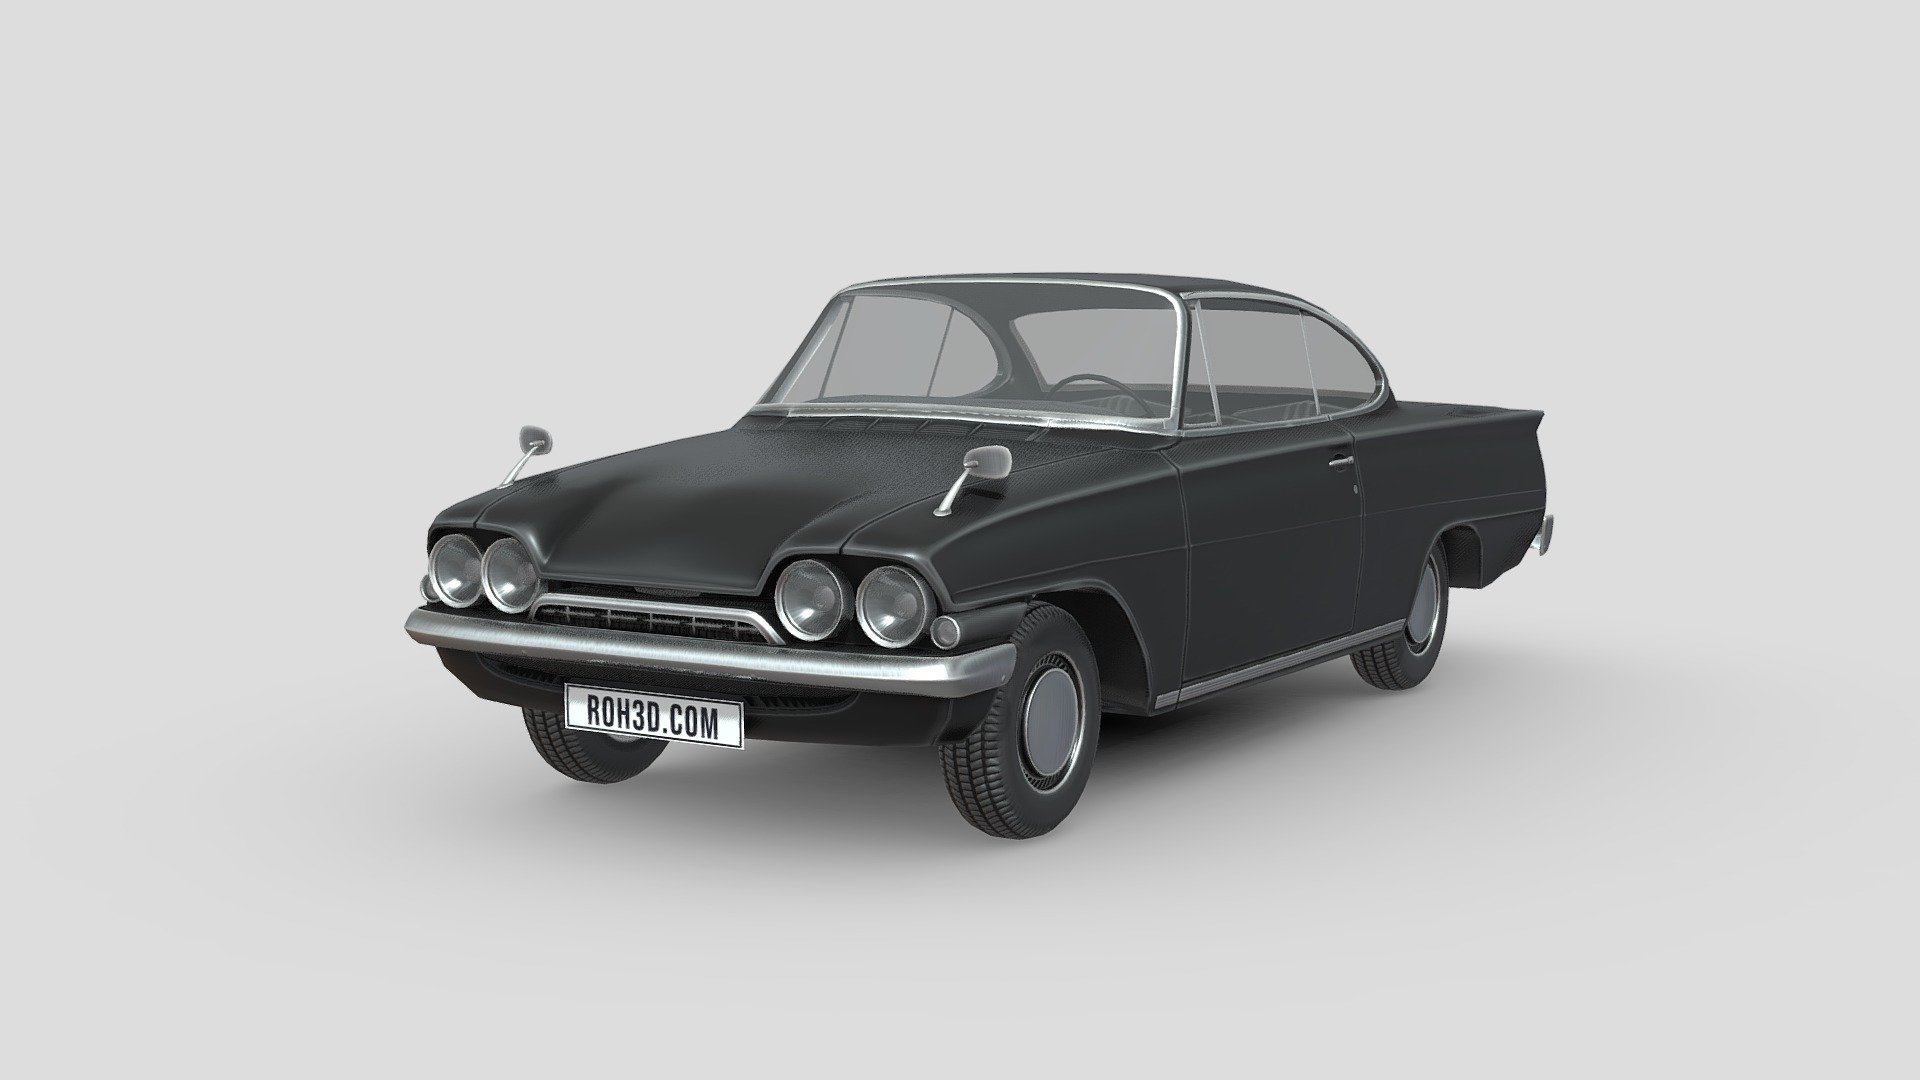 The Ford Consul Classic is a mid-sized car that was launched in May 1961 and built by Ford UK from 1961 to 1963. It was available in two or four door saloon form, in Standard or De Luxe versions, and with floor or column gearshift. The name Ford Consul 315 was used for export markets. The Ford Consul Capri was a 2-door coupé version of the Classic, and was available from 1961 until 1964.

The 1,340 cc (82 cu in) four-cylinder pre-crossflow Kent engine was replaced in August 1962 by an over-square 1,498 cc (91.4 cu in) engine with a new five-bearing crankshaft and a new gearbox with synchromesh on all four forward ratios. Steering and suspension also received &ldquo;greased for life